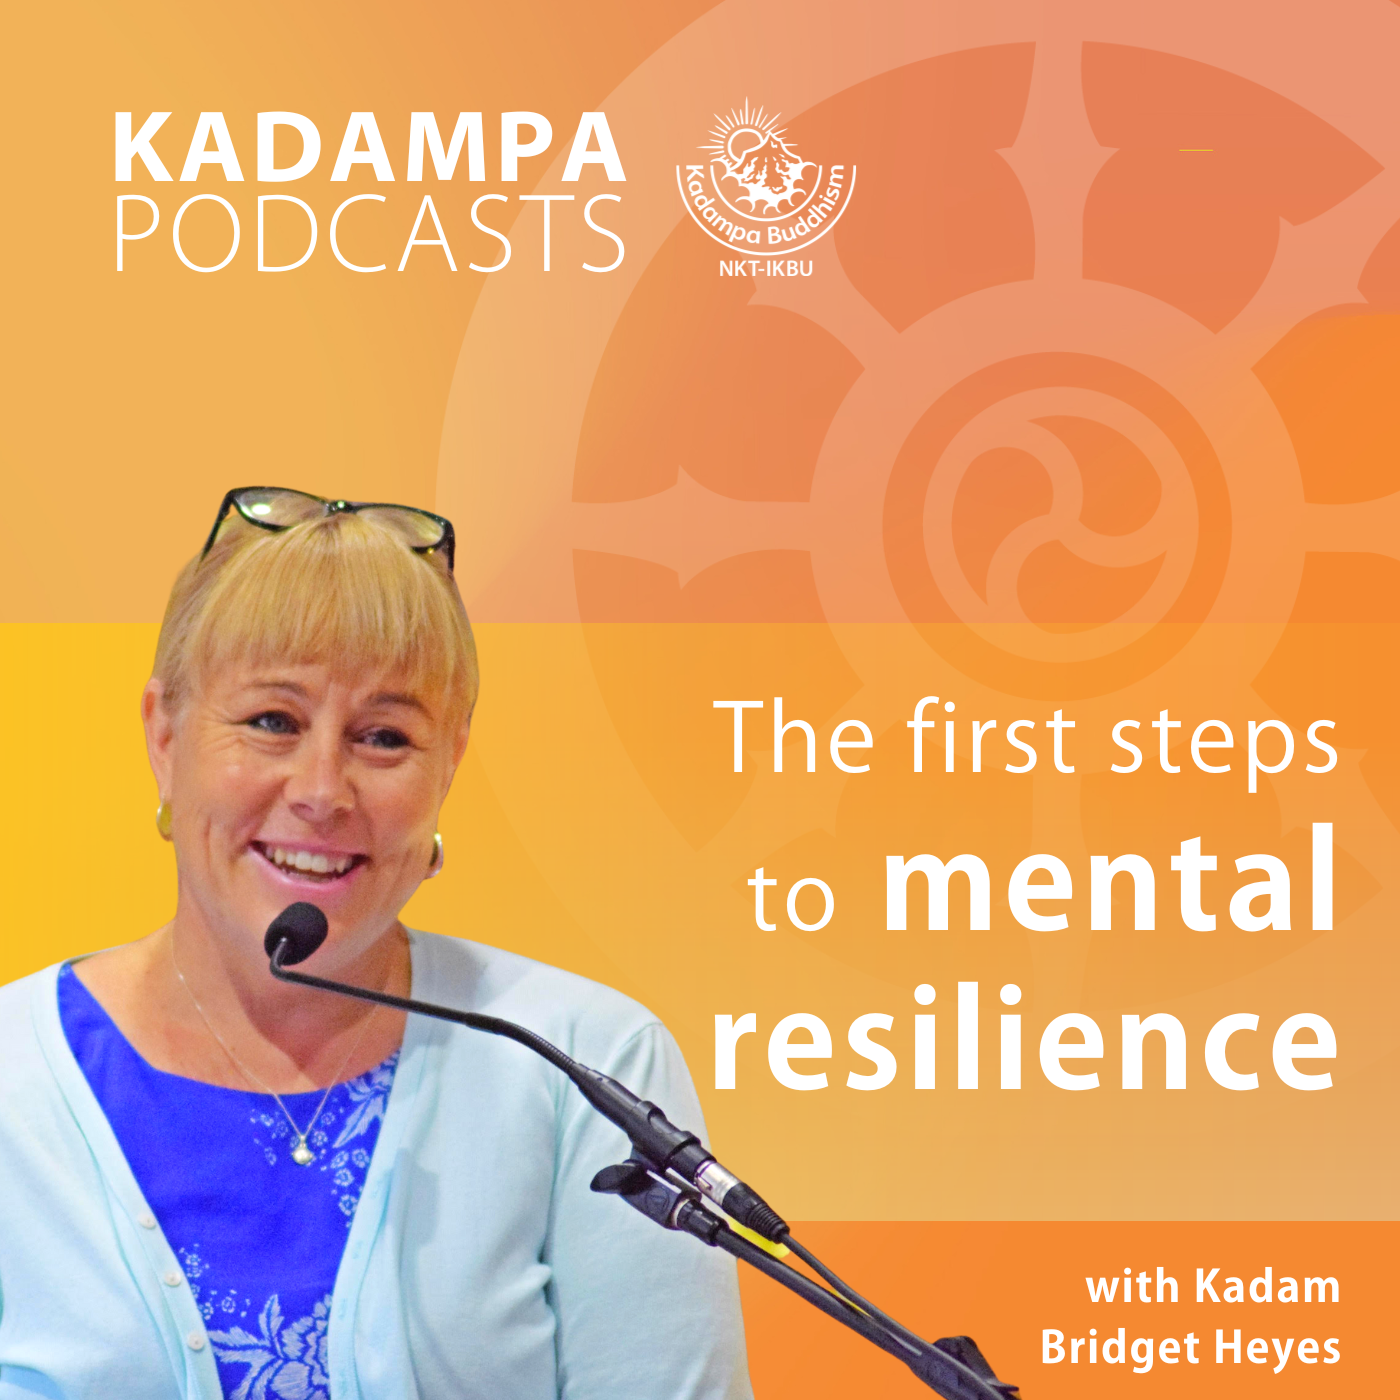 The first steps to developing mental resilience